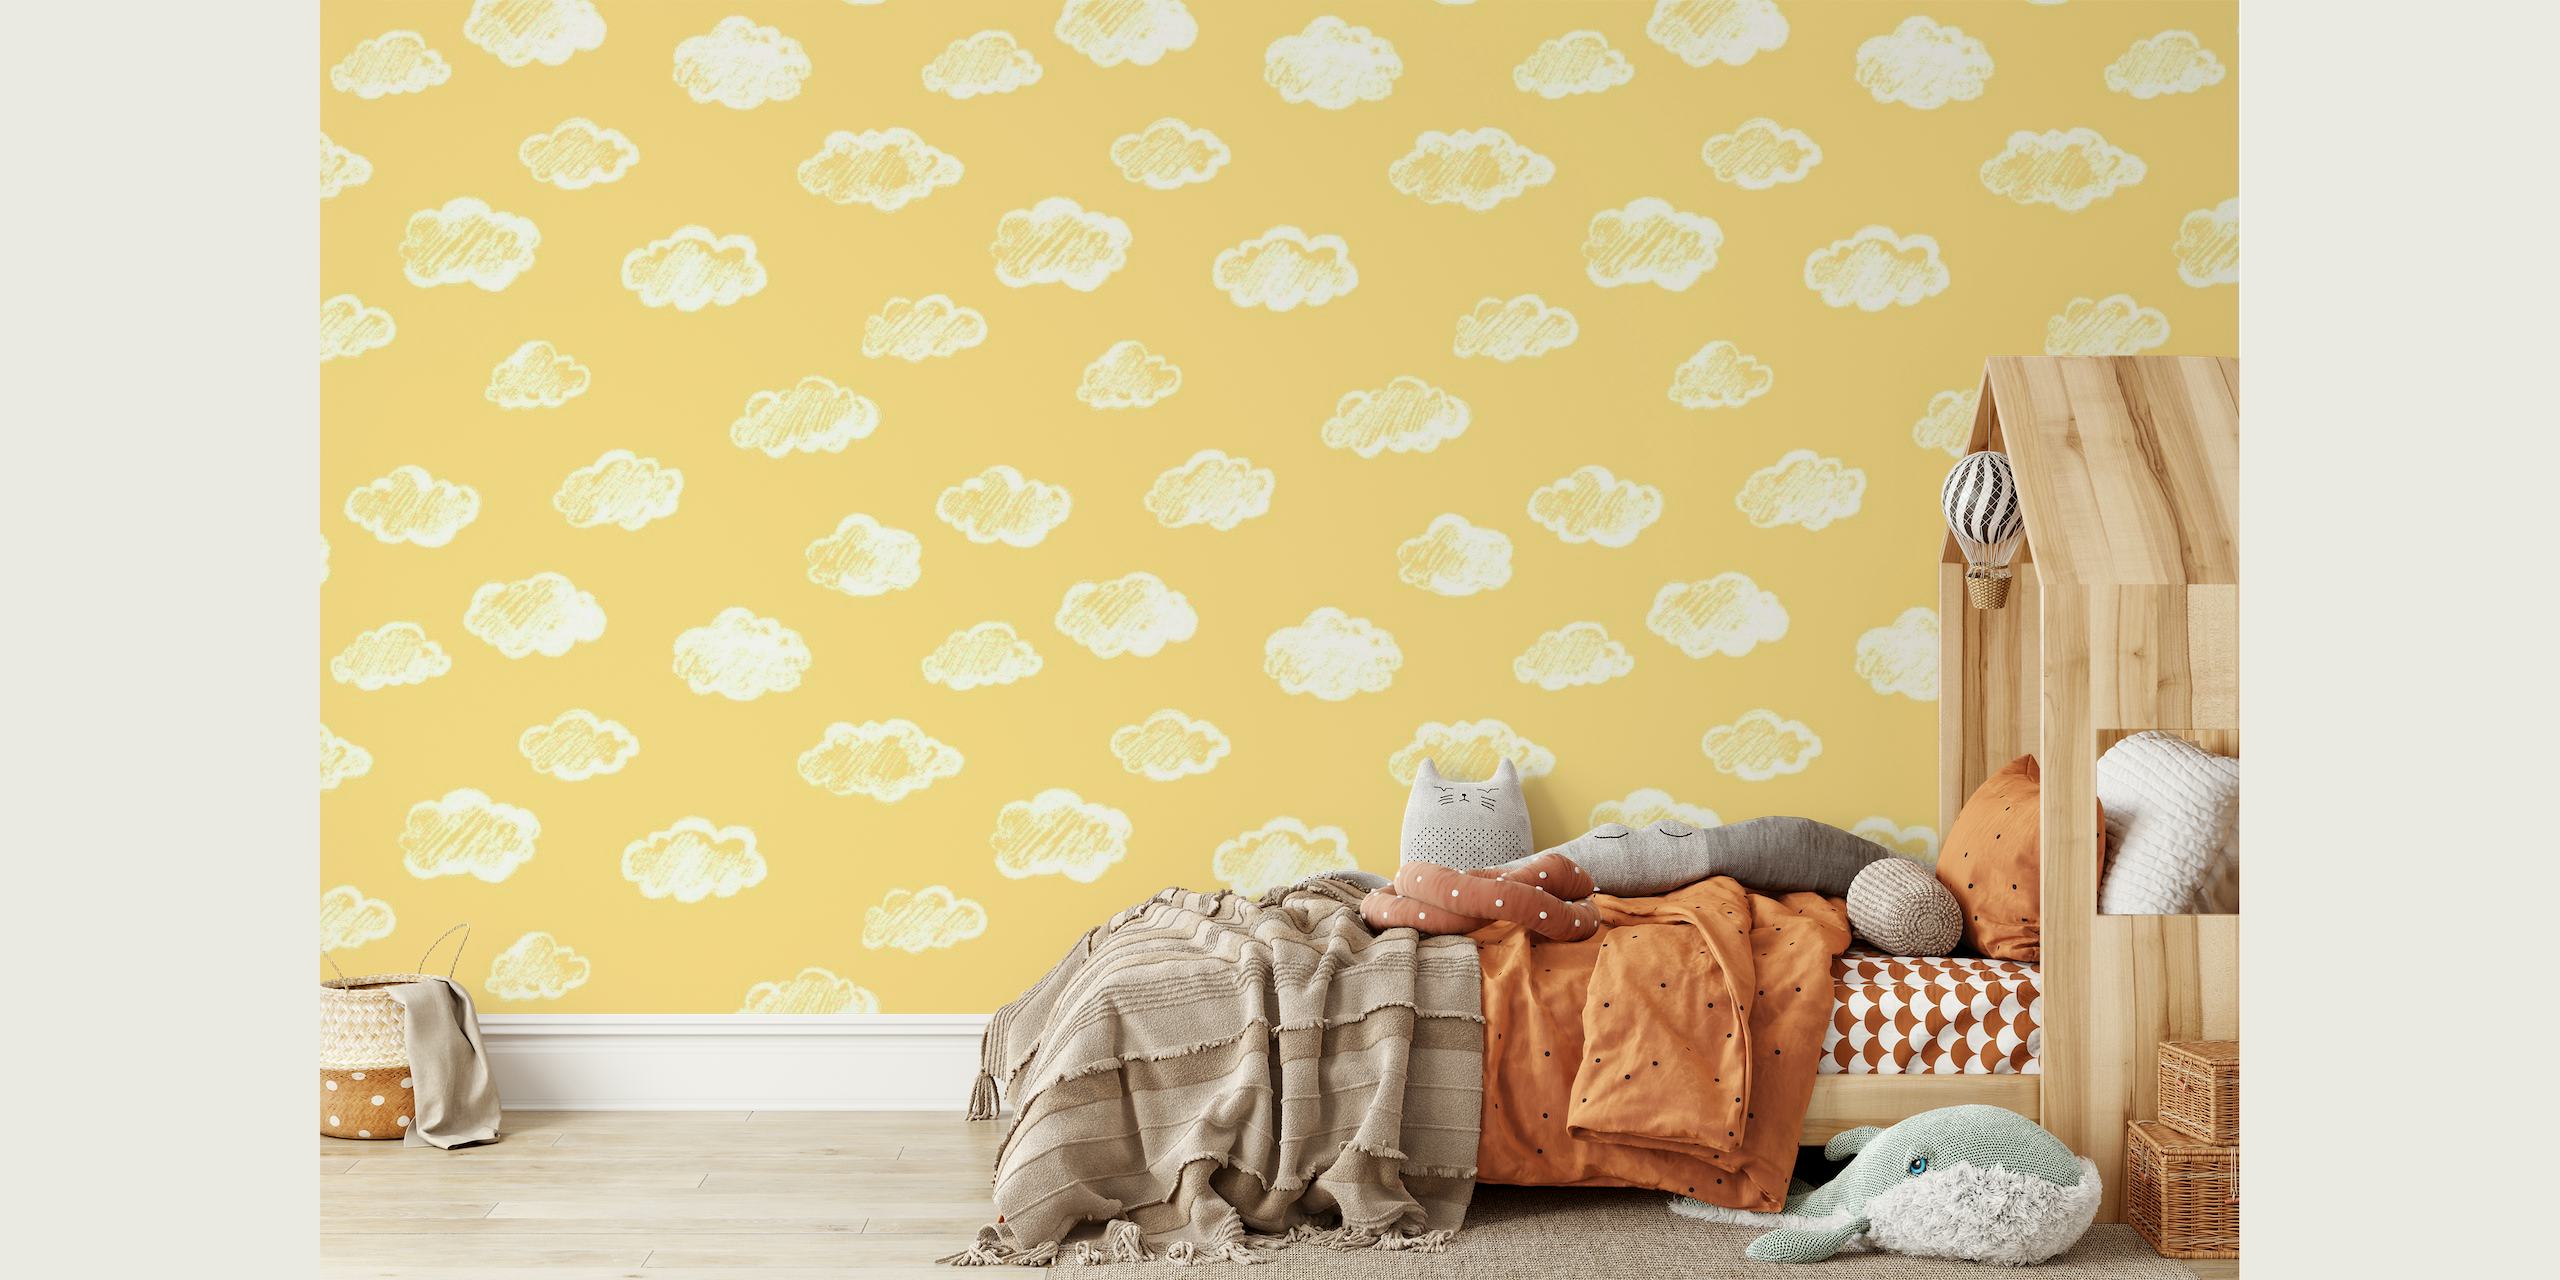 Chalk Clouds On Yellow wallpaper